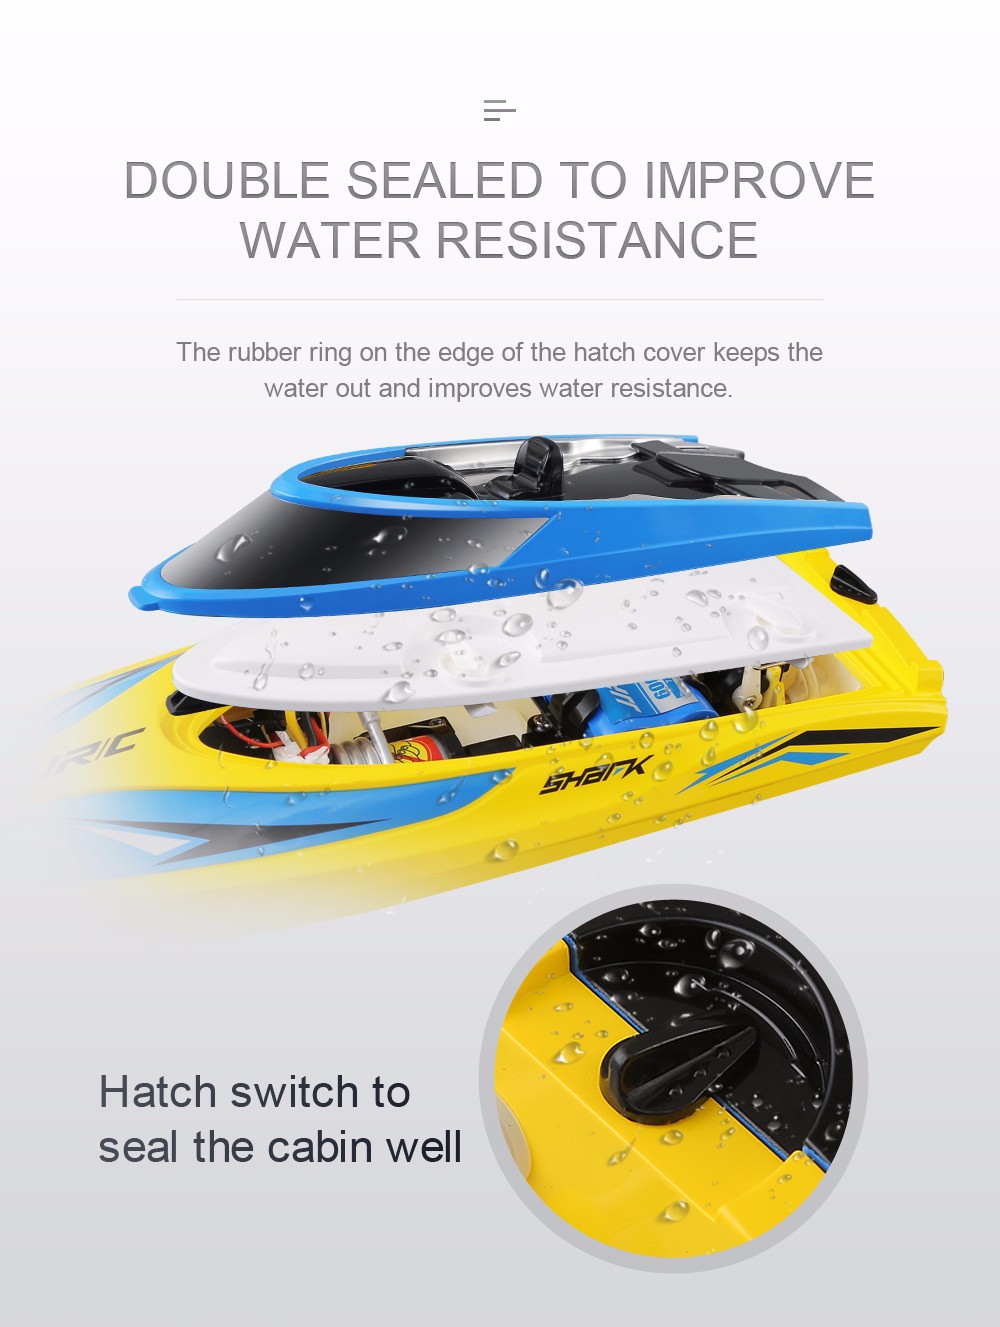 JJRC S3 Waterproof Turnover Reset Water Cooling High Speed 25km/h RC Boat